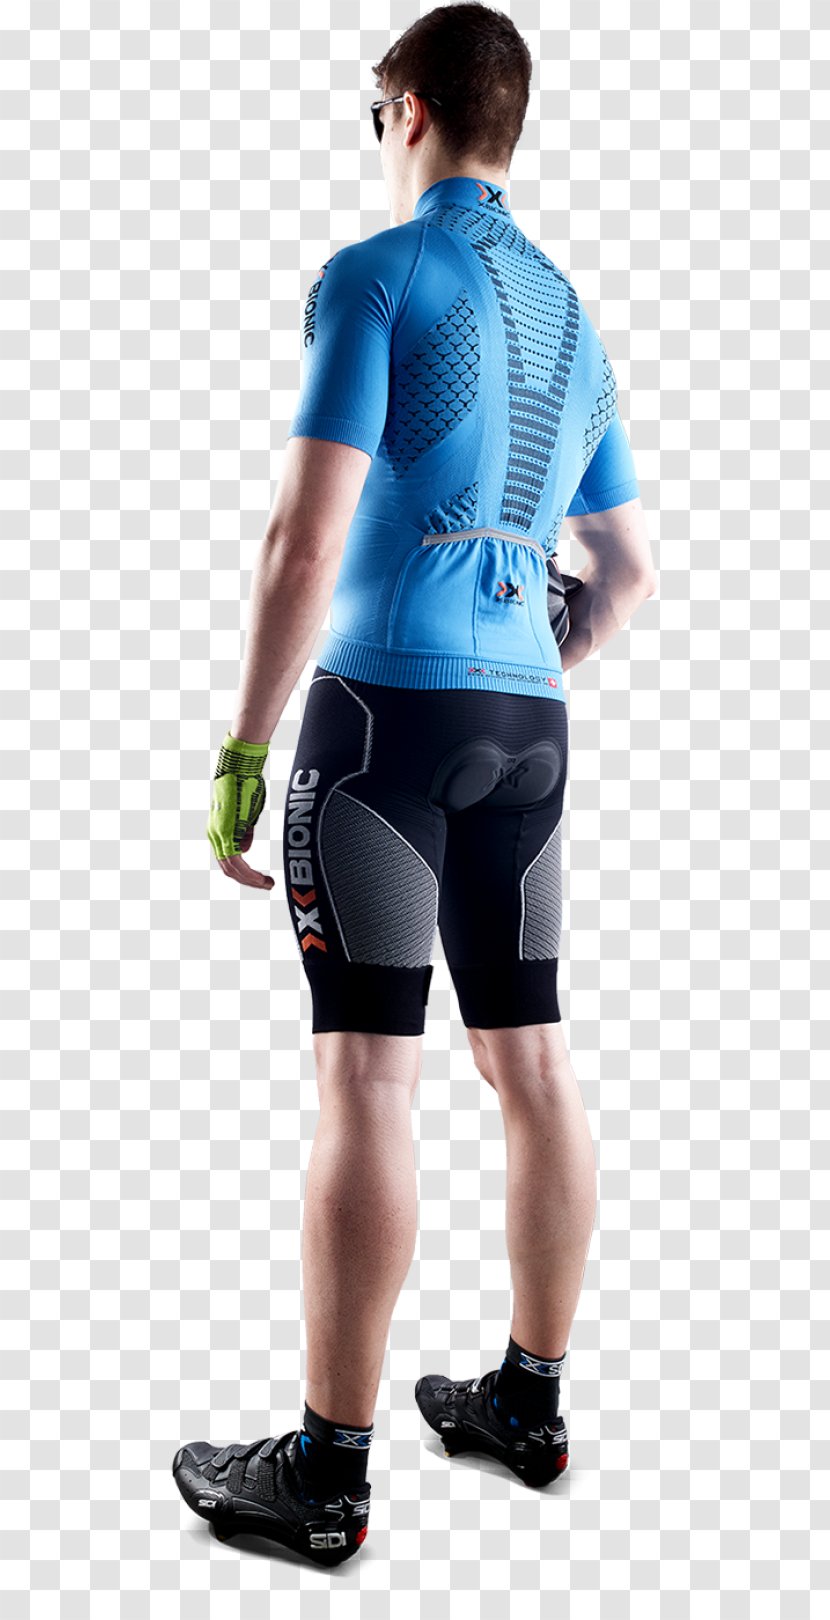 Men X-BIONIC Twyce Bicycle Cycling Pad Shorts Structure - Neck - Natural Human Body Temps Transparent PNG